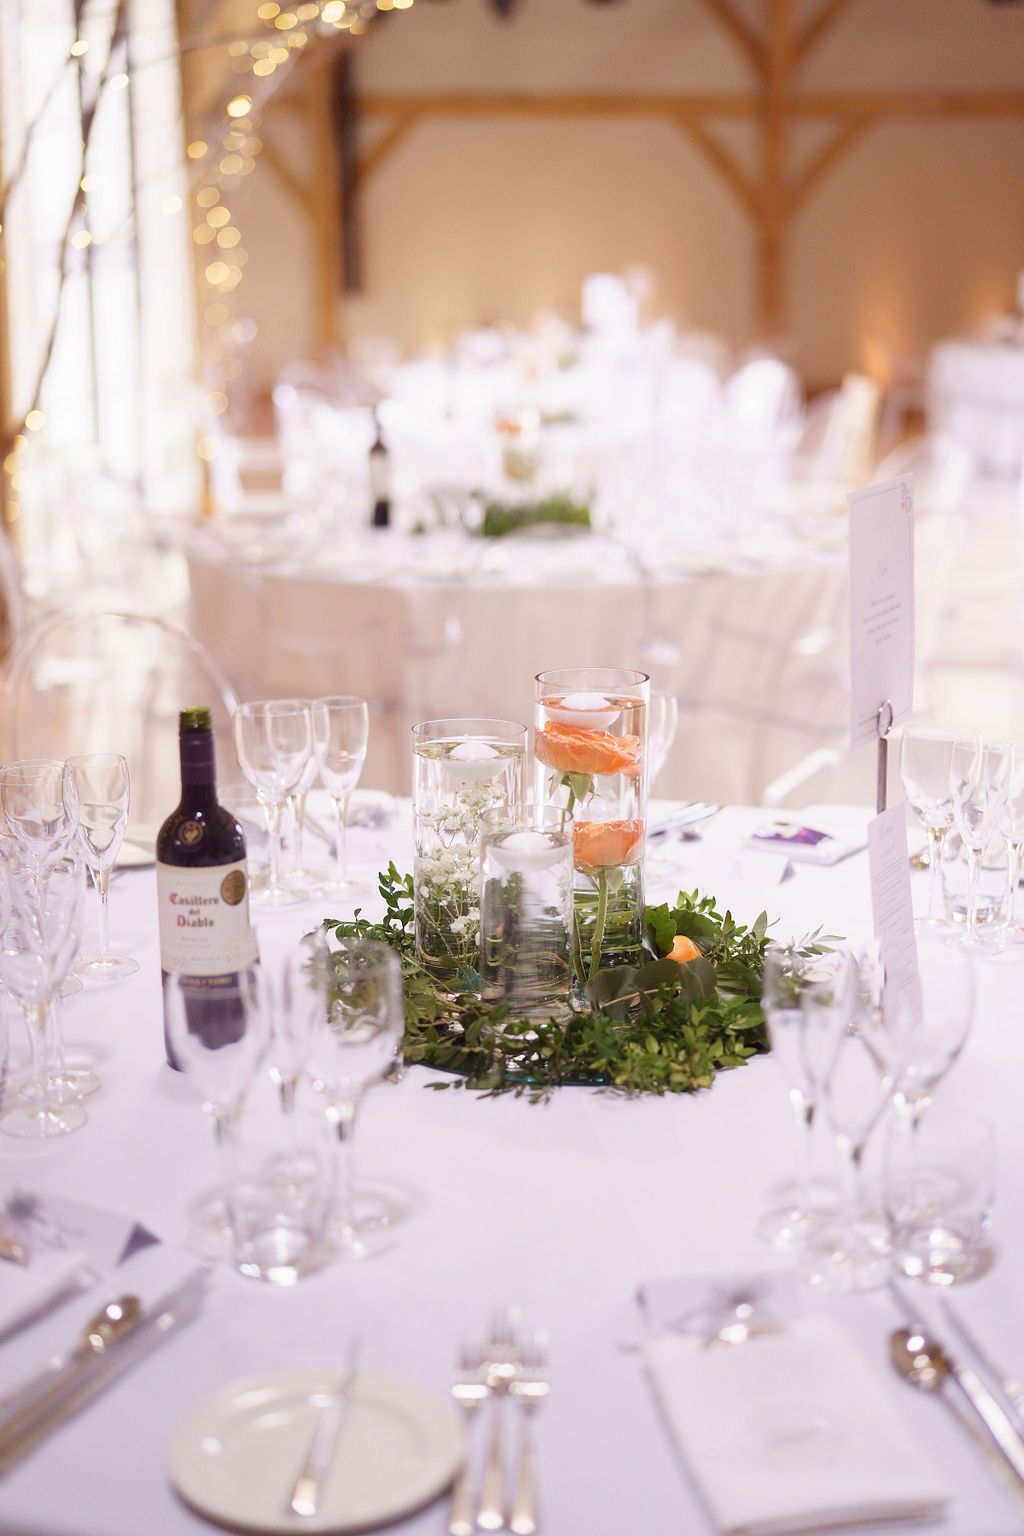 Beautiful table decorations and greenery centre pieces for Bex and Dan's wedding - photo thanks to J Bidmead Photography